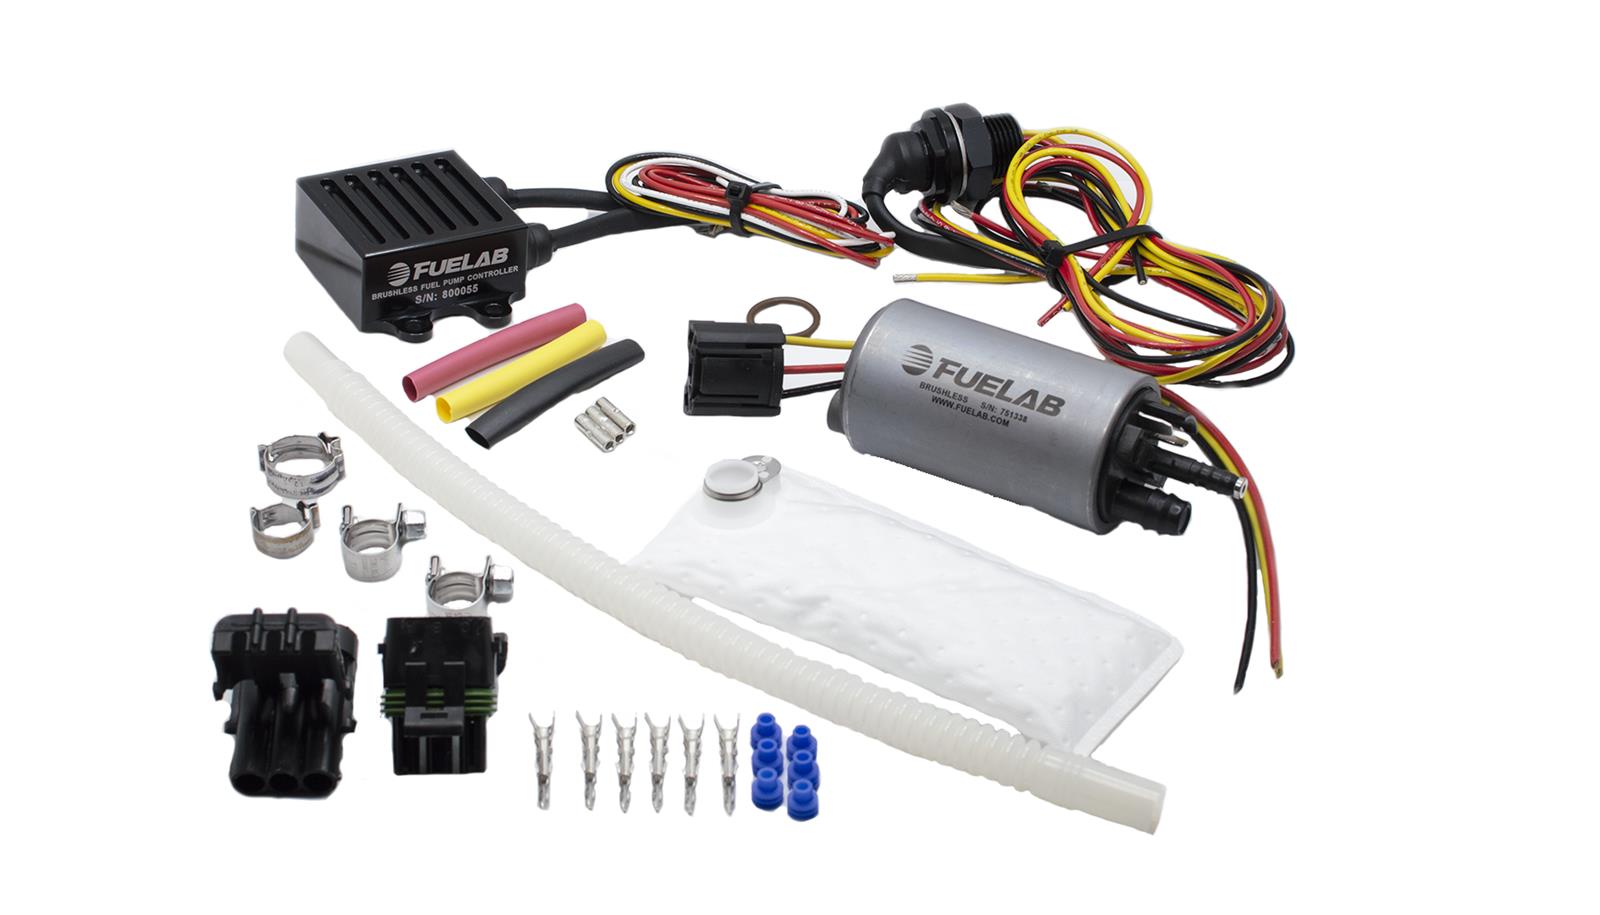 FUELAB 25314 In-Tank Brushless Fuel Pump Kit 500 LPH with 9 mm Barb Outlet, 6 mm Barb Siphon Photo-0 